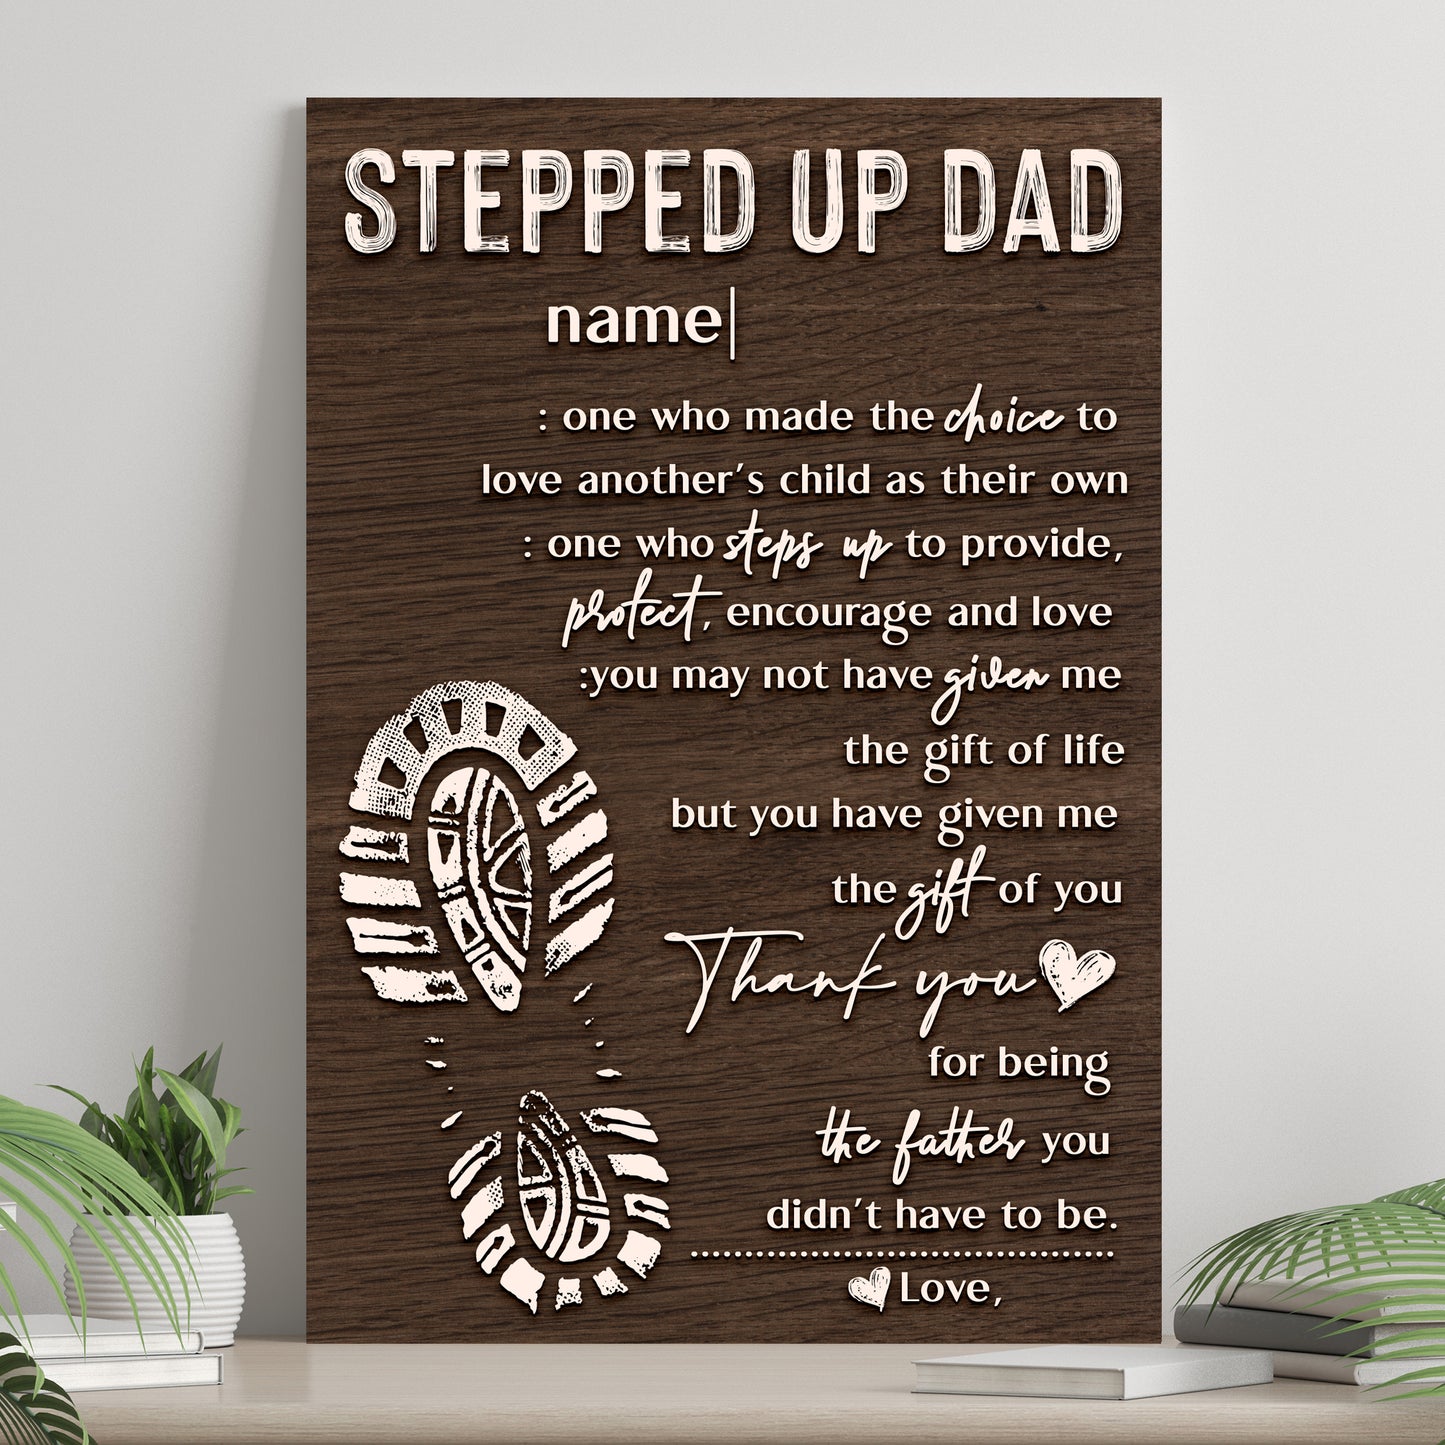 Thank You For Being The Father You Didn't Have To Be Happy Father's Day Sign  - Image by Tailored Canvases